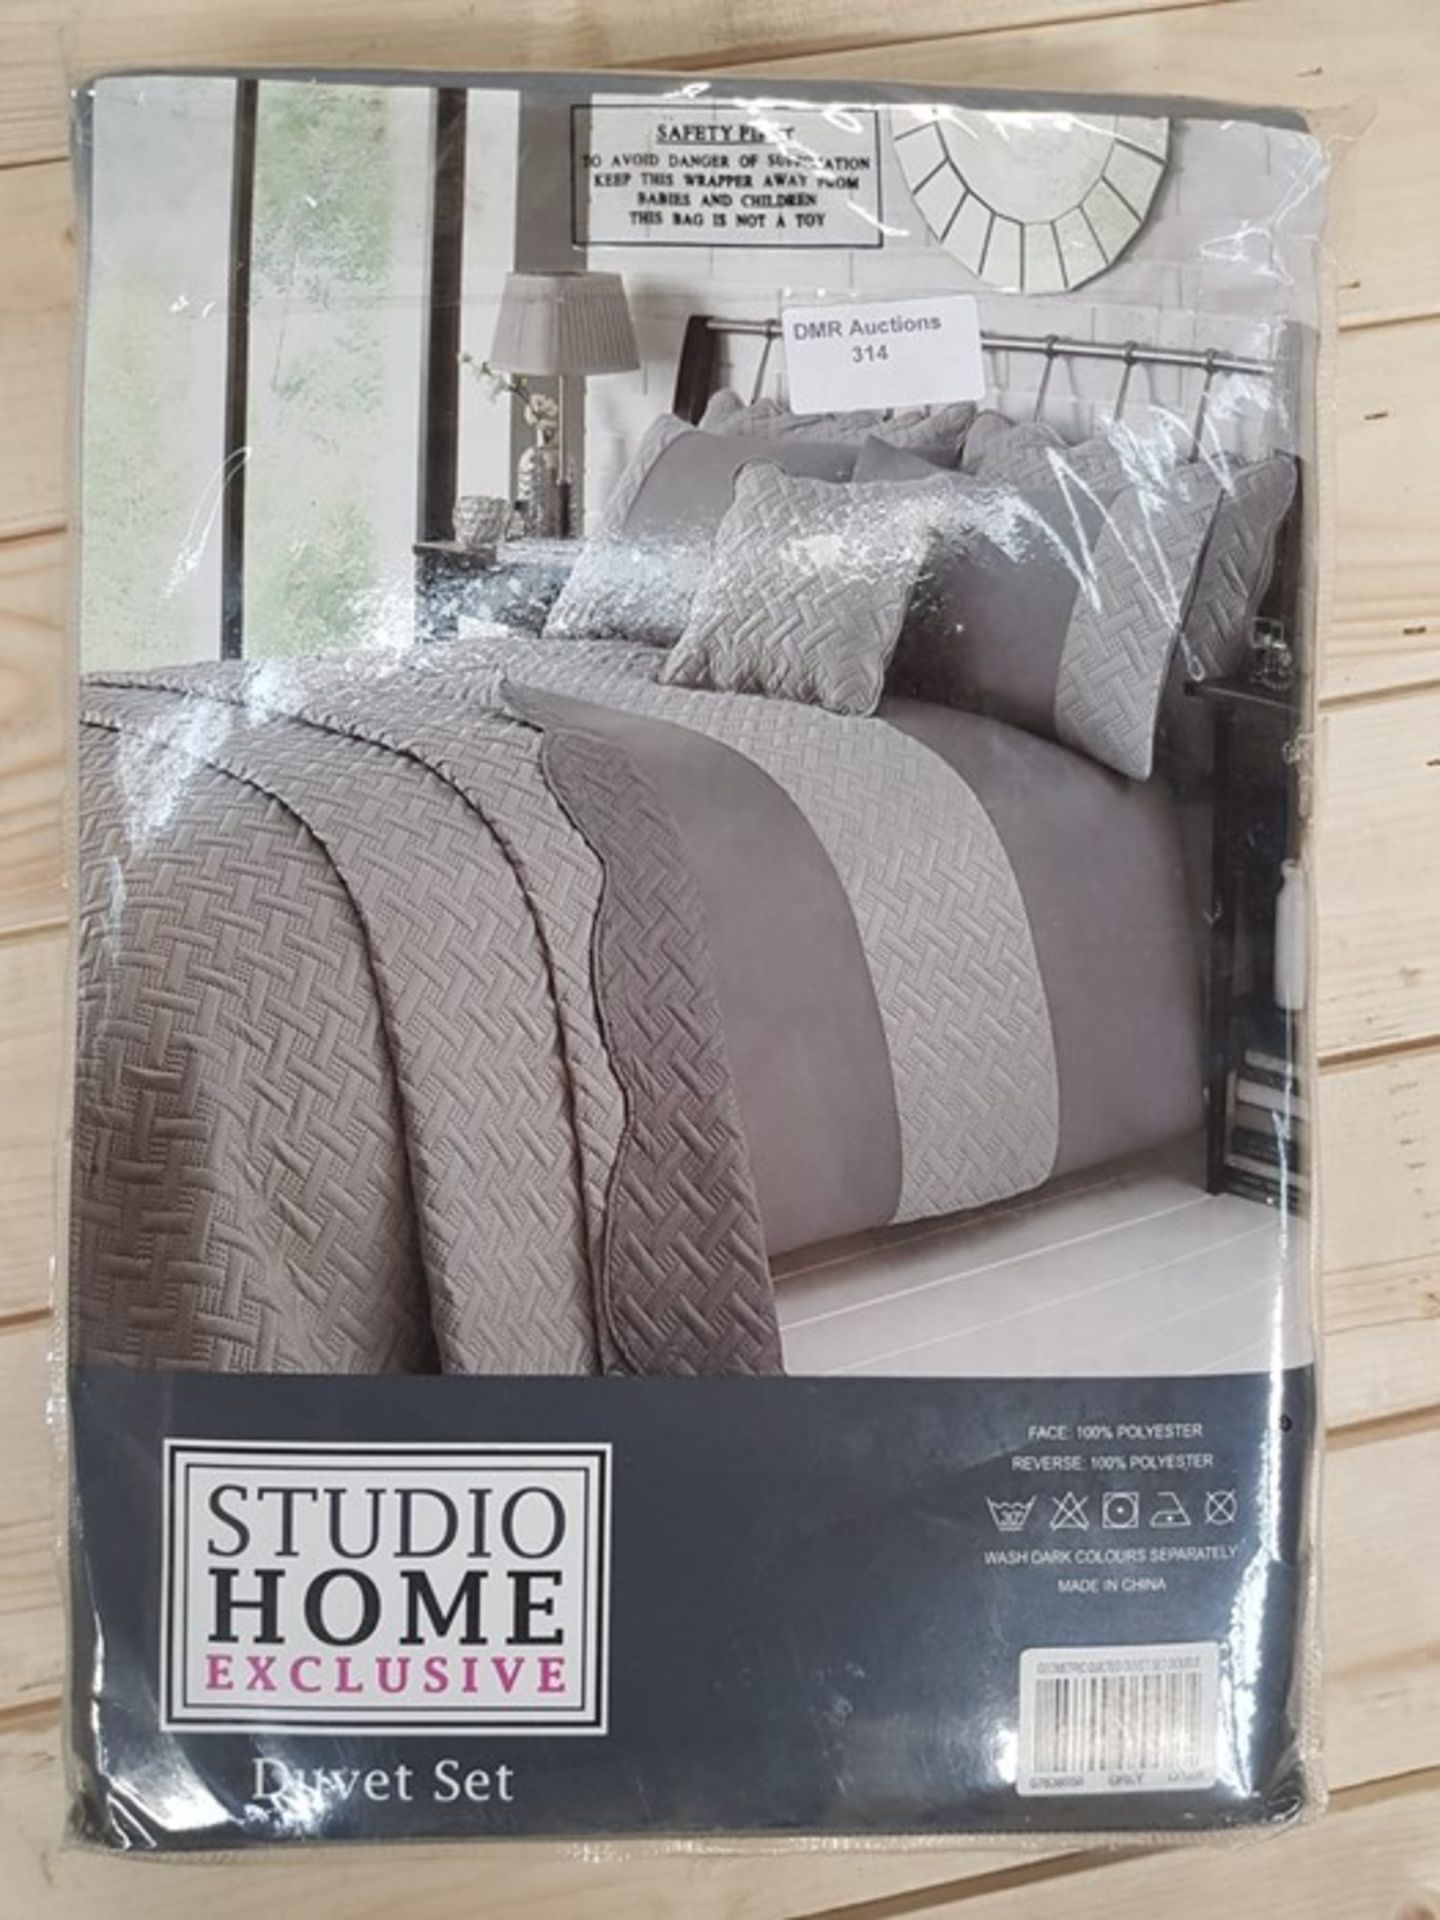 1 AS NEW BAGGED STUDIO HOME EXCLUSIVE DUVET SET IN GREY (PUBLIC VIEWING AVAILABLE)